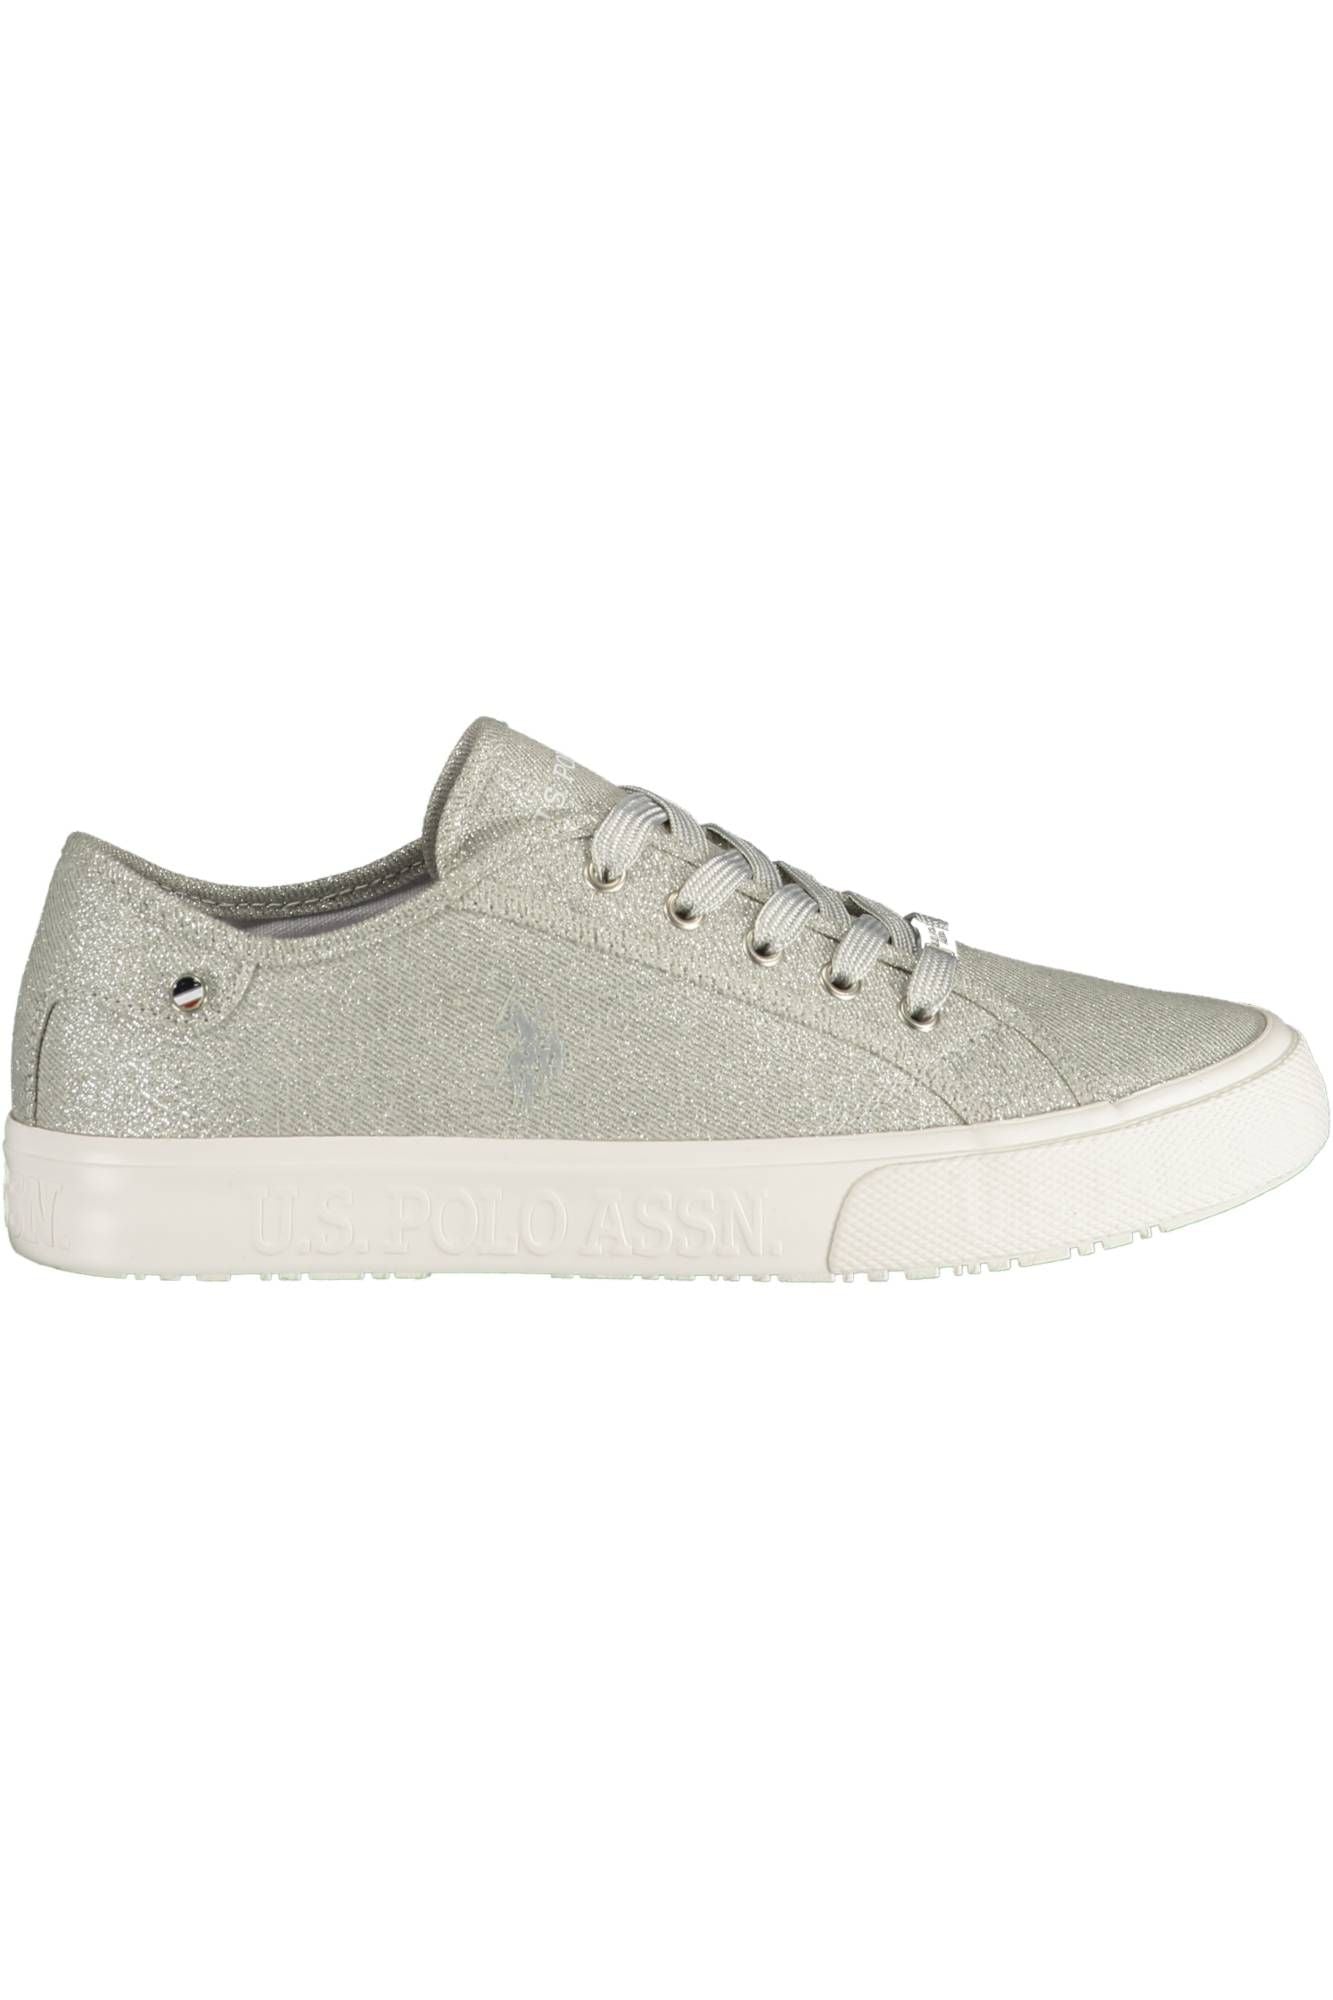 Silver Lace-up Sporty Sneakers for Modern Women